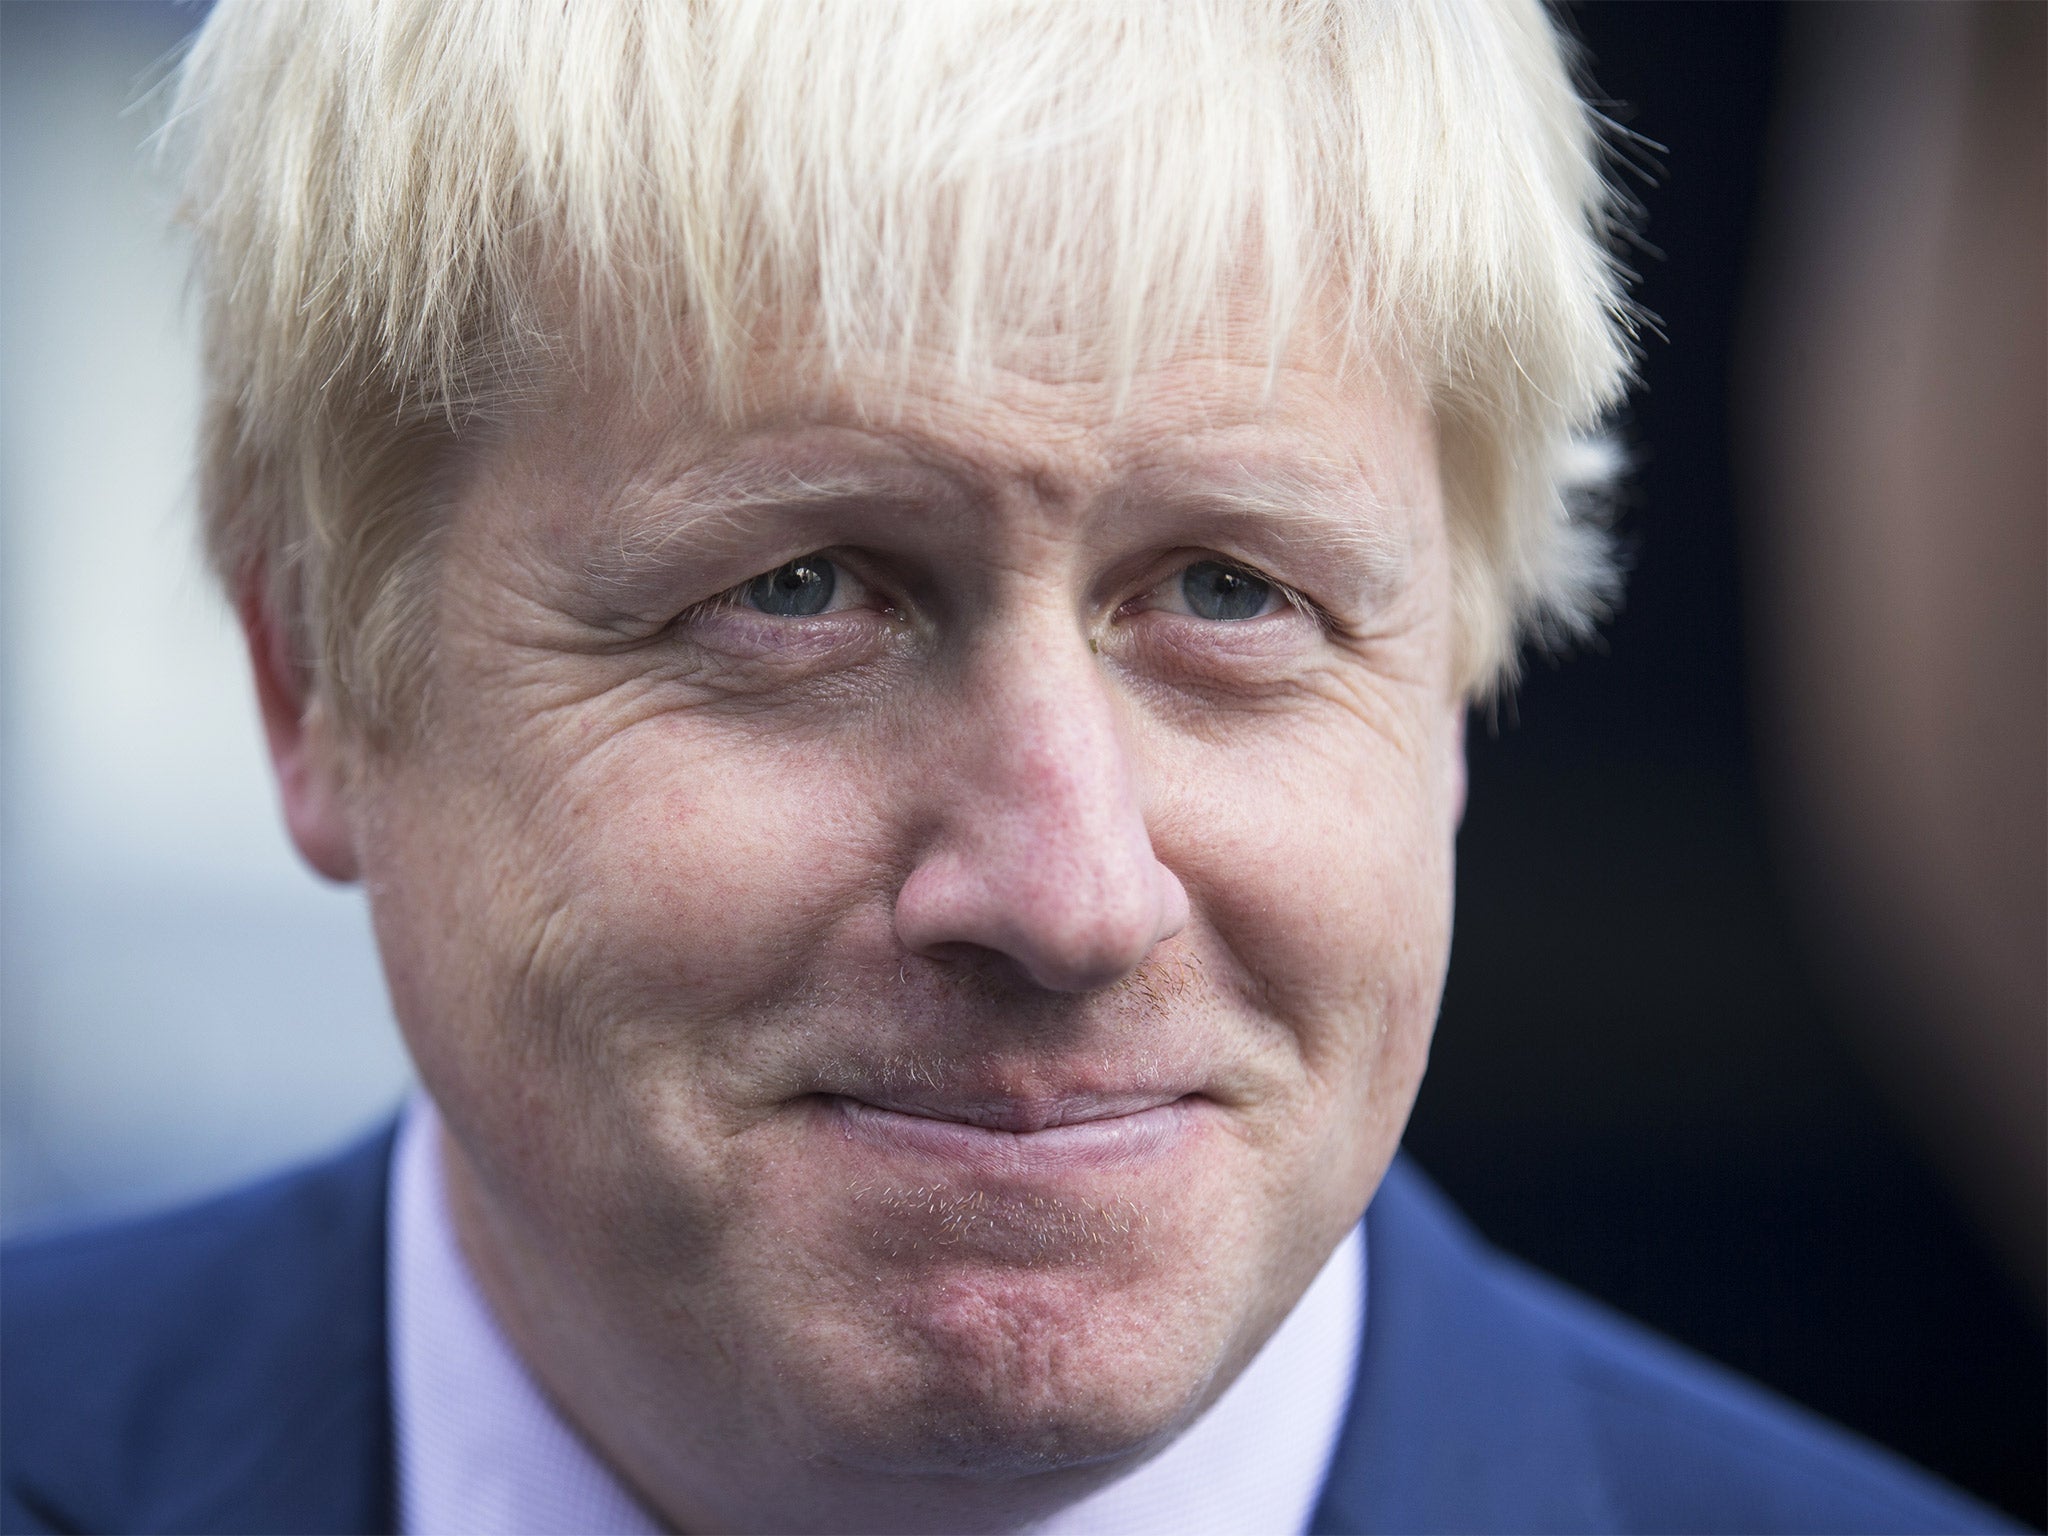 London Mayor Boris Johnson's new plan for a 'Citizens Wealth Fund' sounds too good to be true - because it is